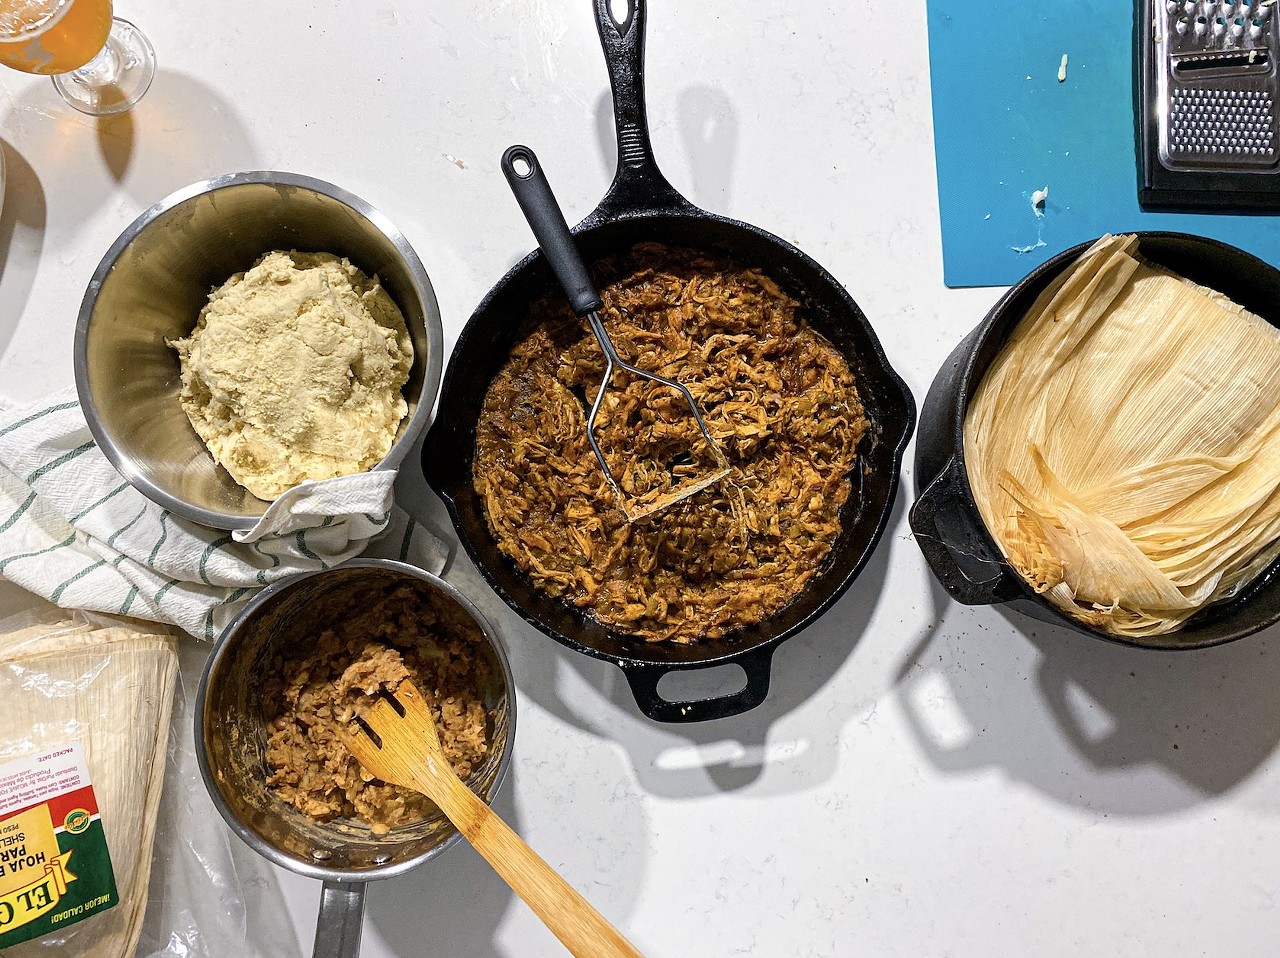 Throw a tamalada 
No, this isn't one for beginners, but if you're serious about having a Puro San Antonio Christmas, invite the relatives over to make your own tamales. Just be ready for your Tia to tell you exactly how it should be done.